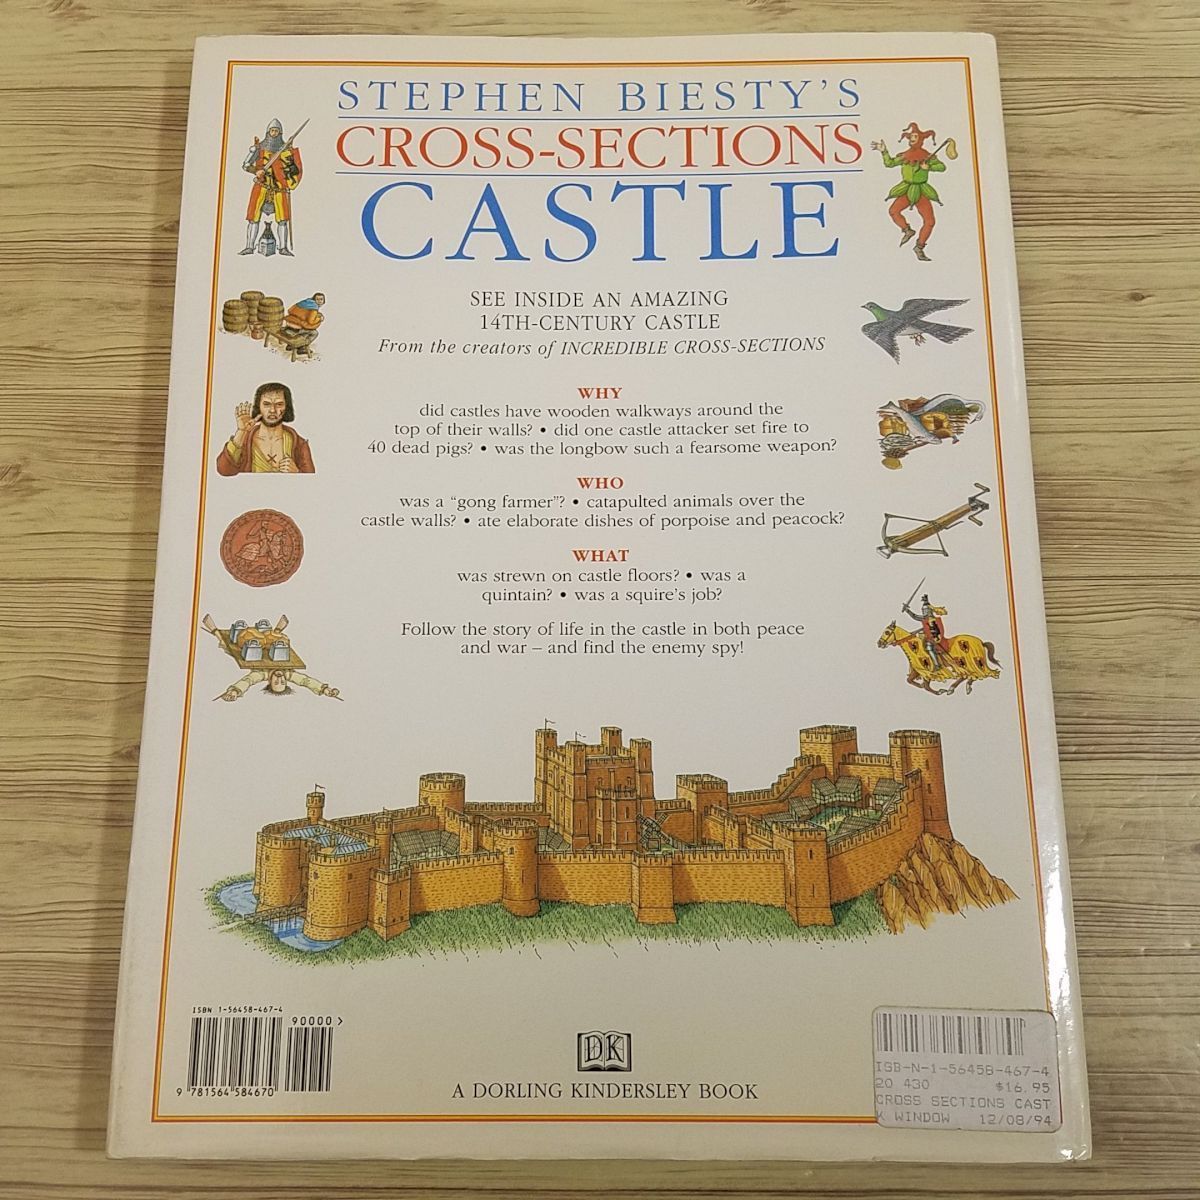  illustrated reference book [ Stephen * Be stay wheel cut . illustrated reference book Europe. castle ( English version )STEPHEN BIESTY*S CROSS-SECTION CASTLE] large book@ Cross section 